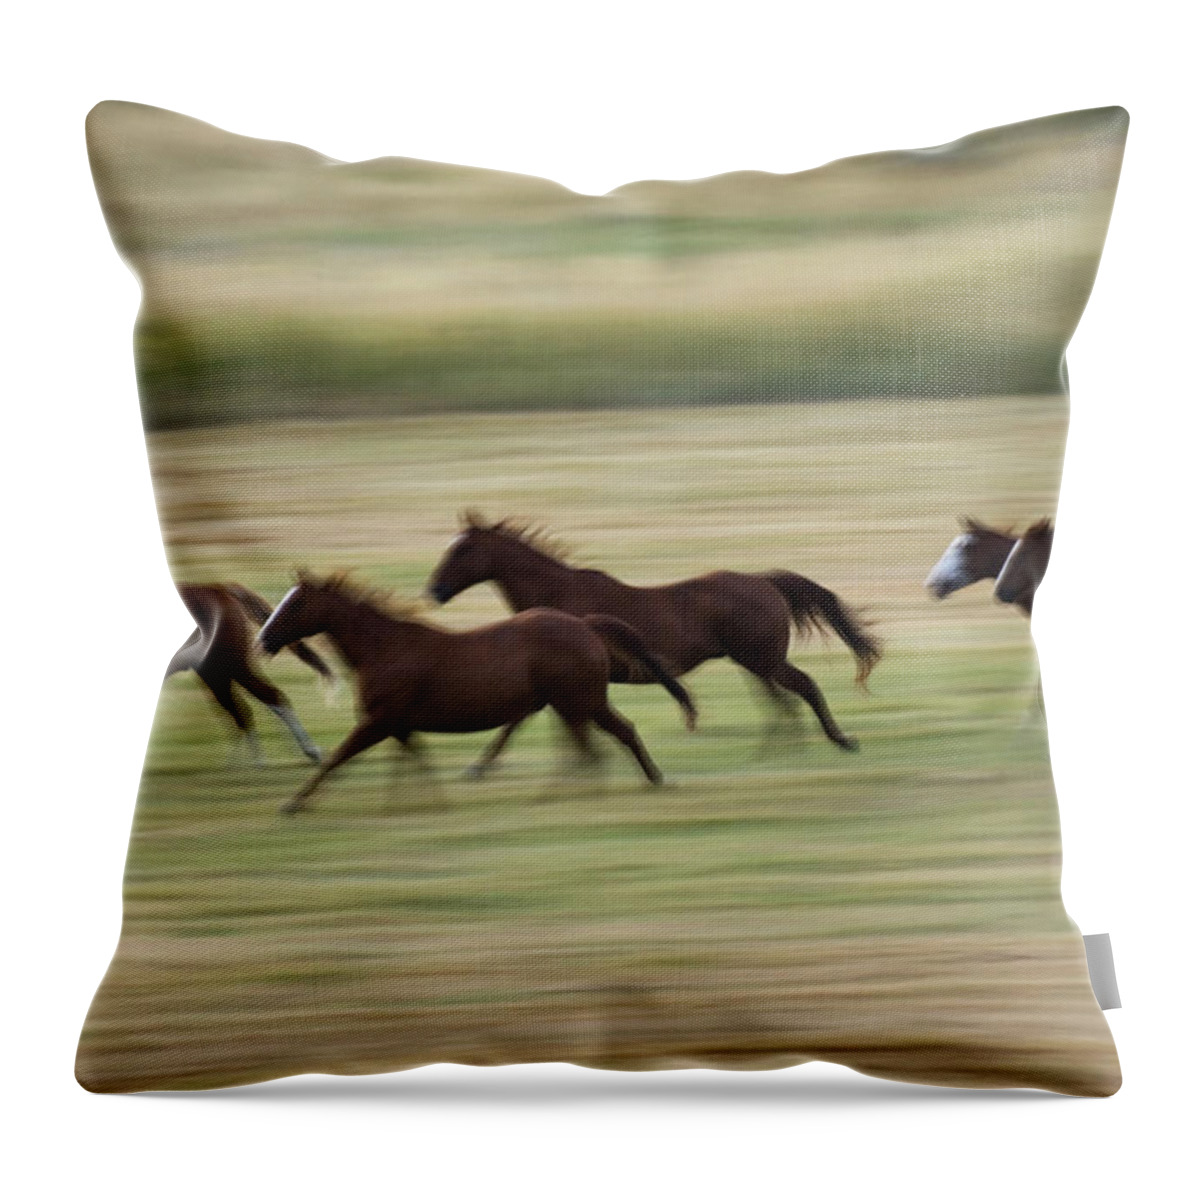 00198163 Throw Pillow featuring the photograph HorsesGalloping by Konrad Wothe